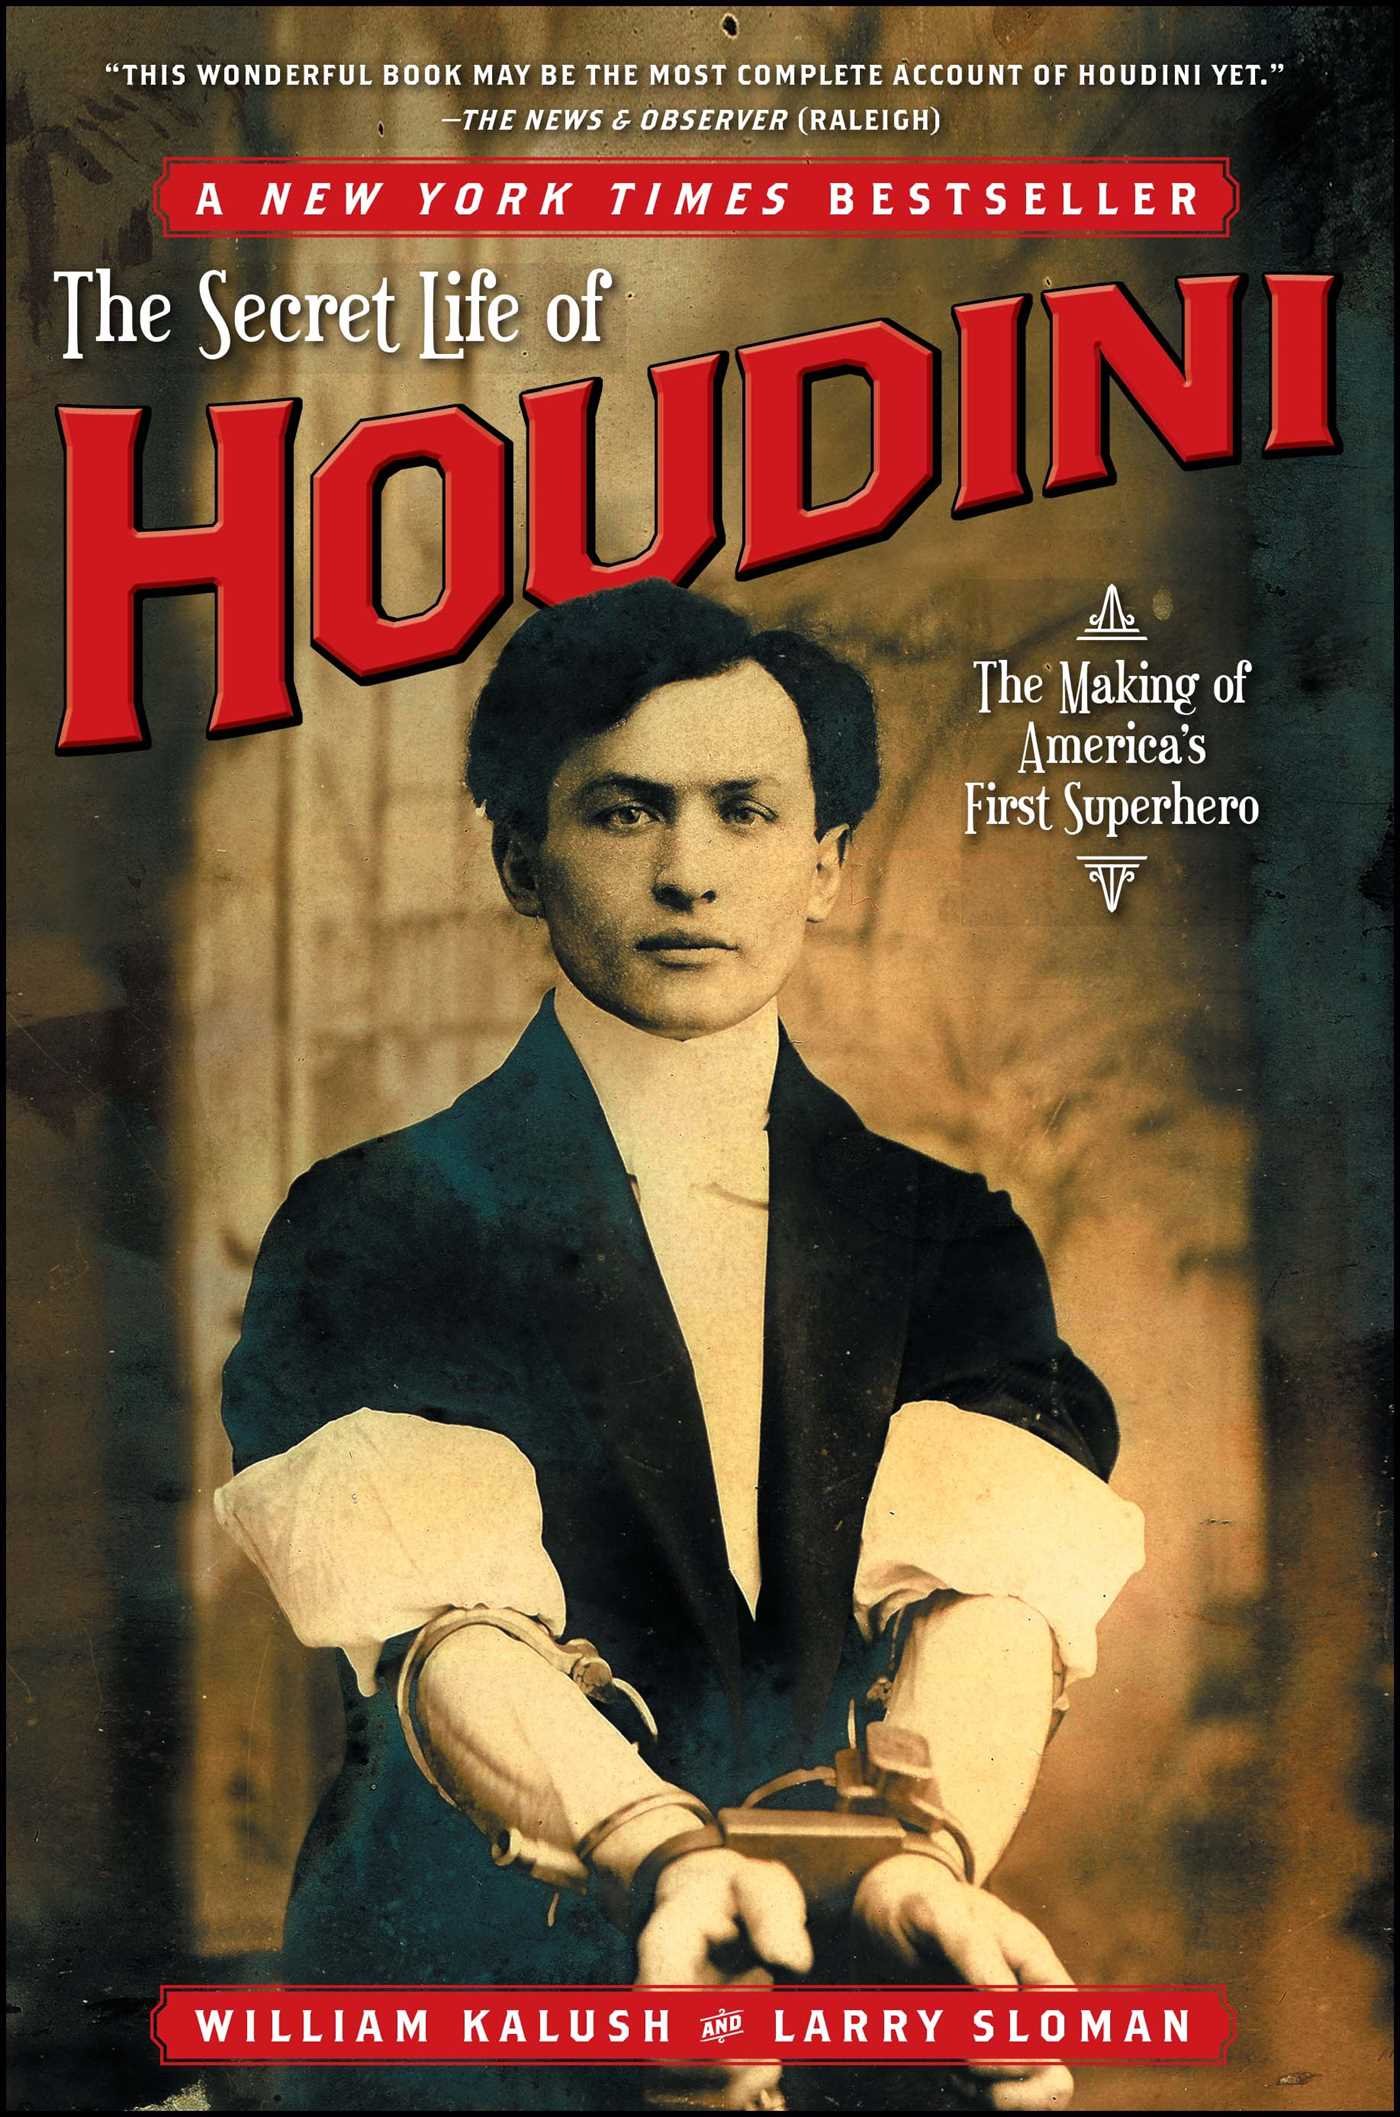 The Book of Houdini